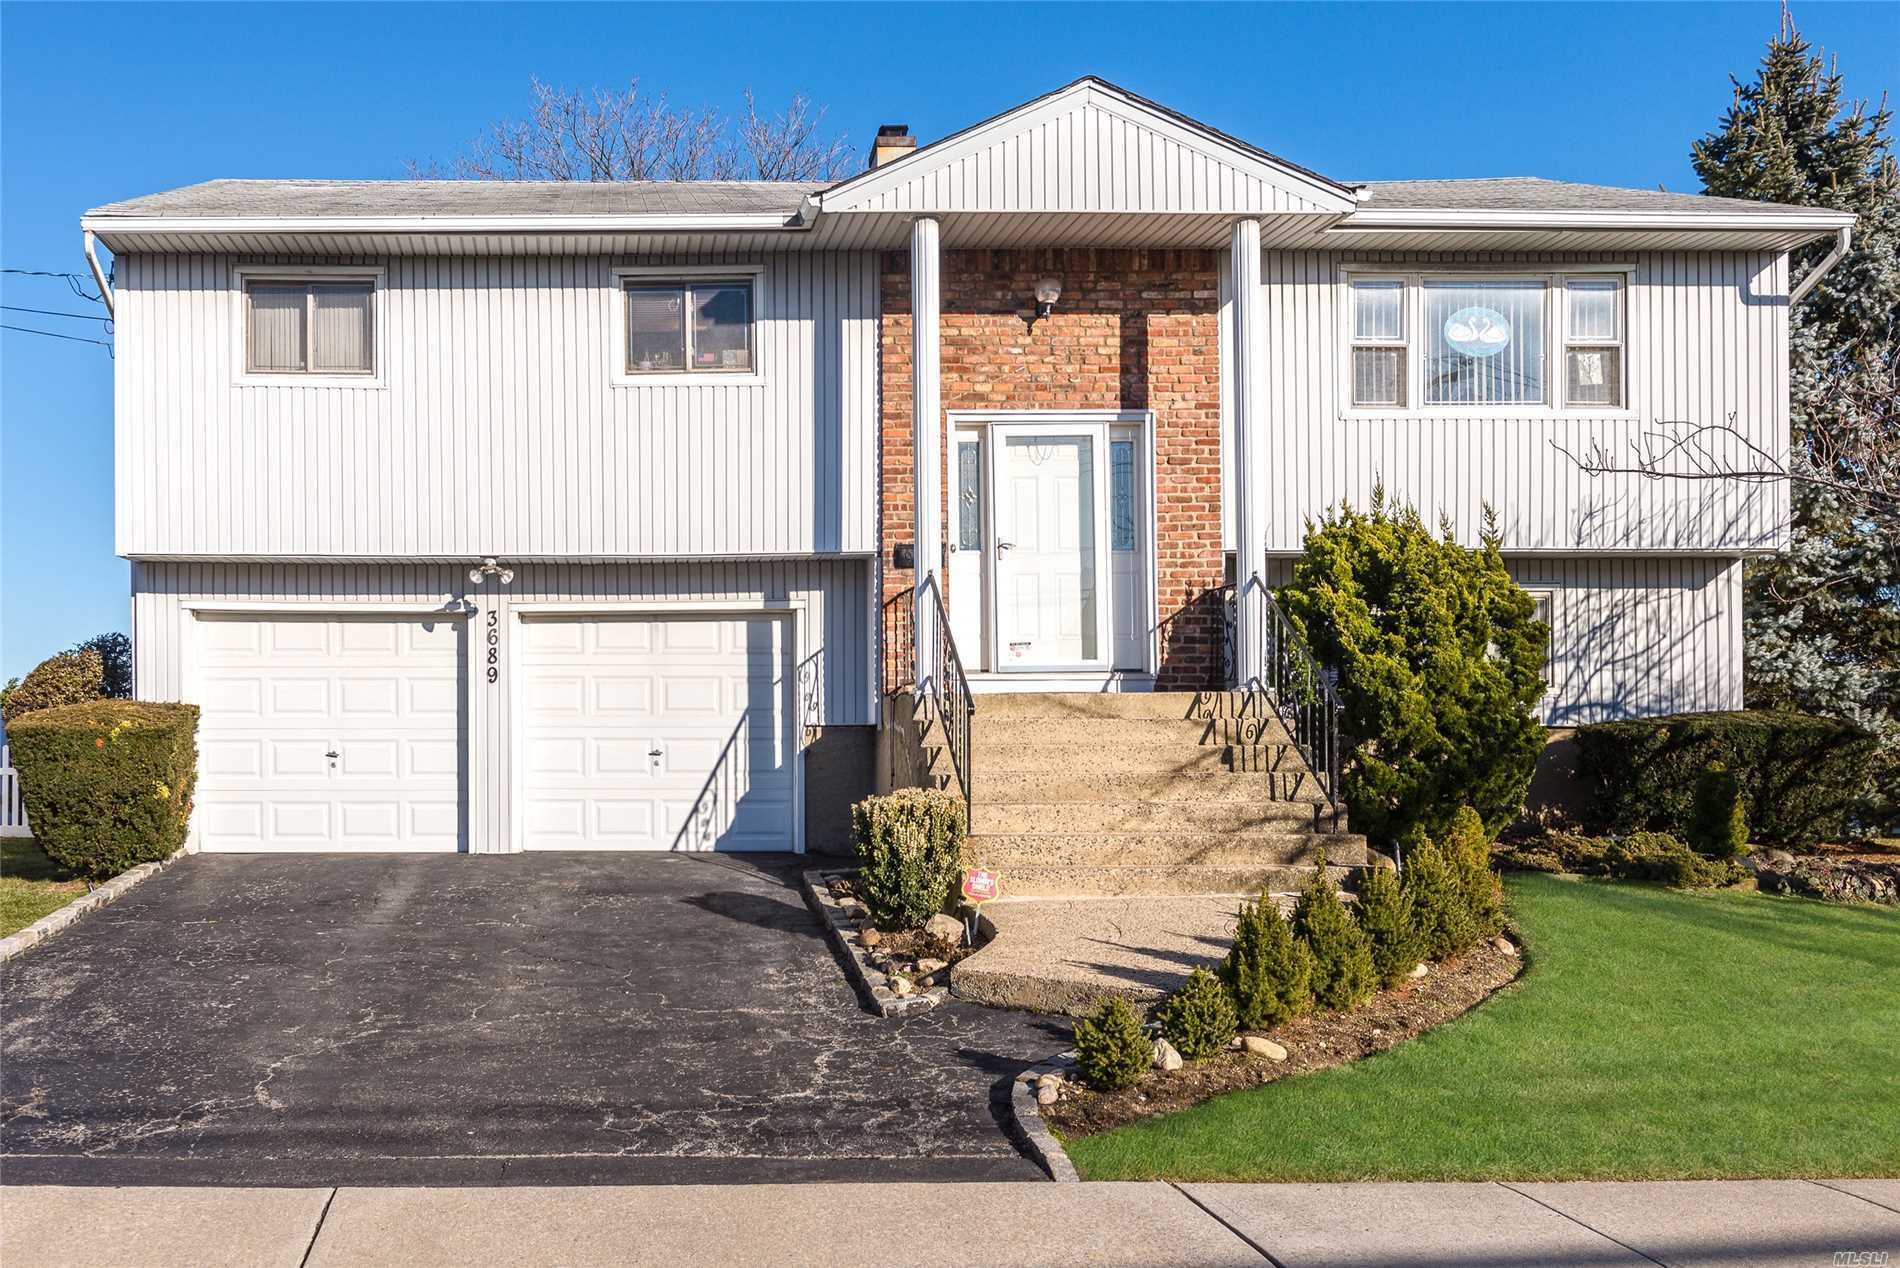 New To The Market. 8 Room Wide-Line Hiranch Located In The Madison Section Offers 4 Bedrooms 2 Full Bathrooms Rear Wood Deck Off Eik, Hardwood Floors On The Upper Level, 2 Car Garage And 6 Zone In Ground Sprinklers. Only Minutes From Shopping And Lirr.